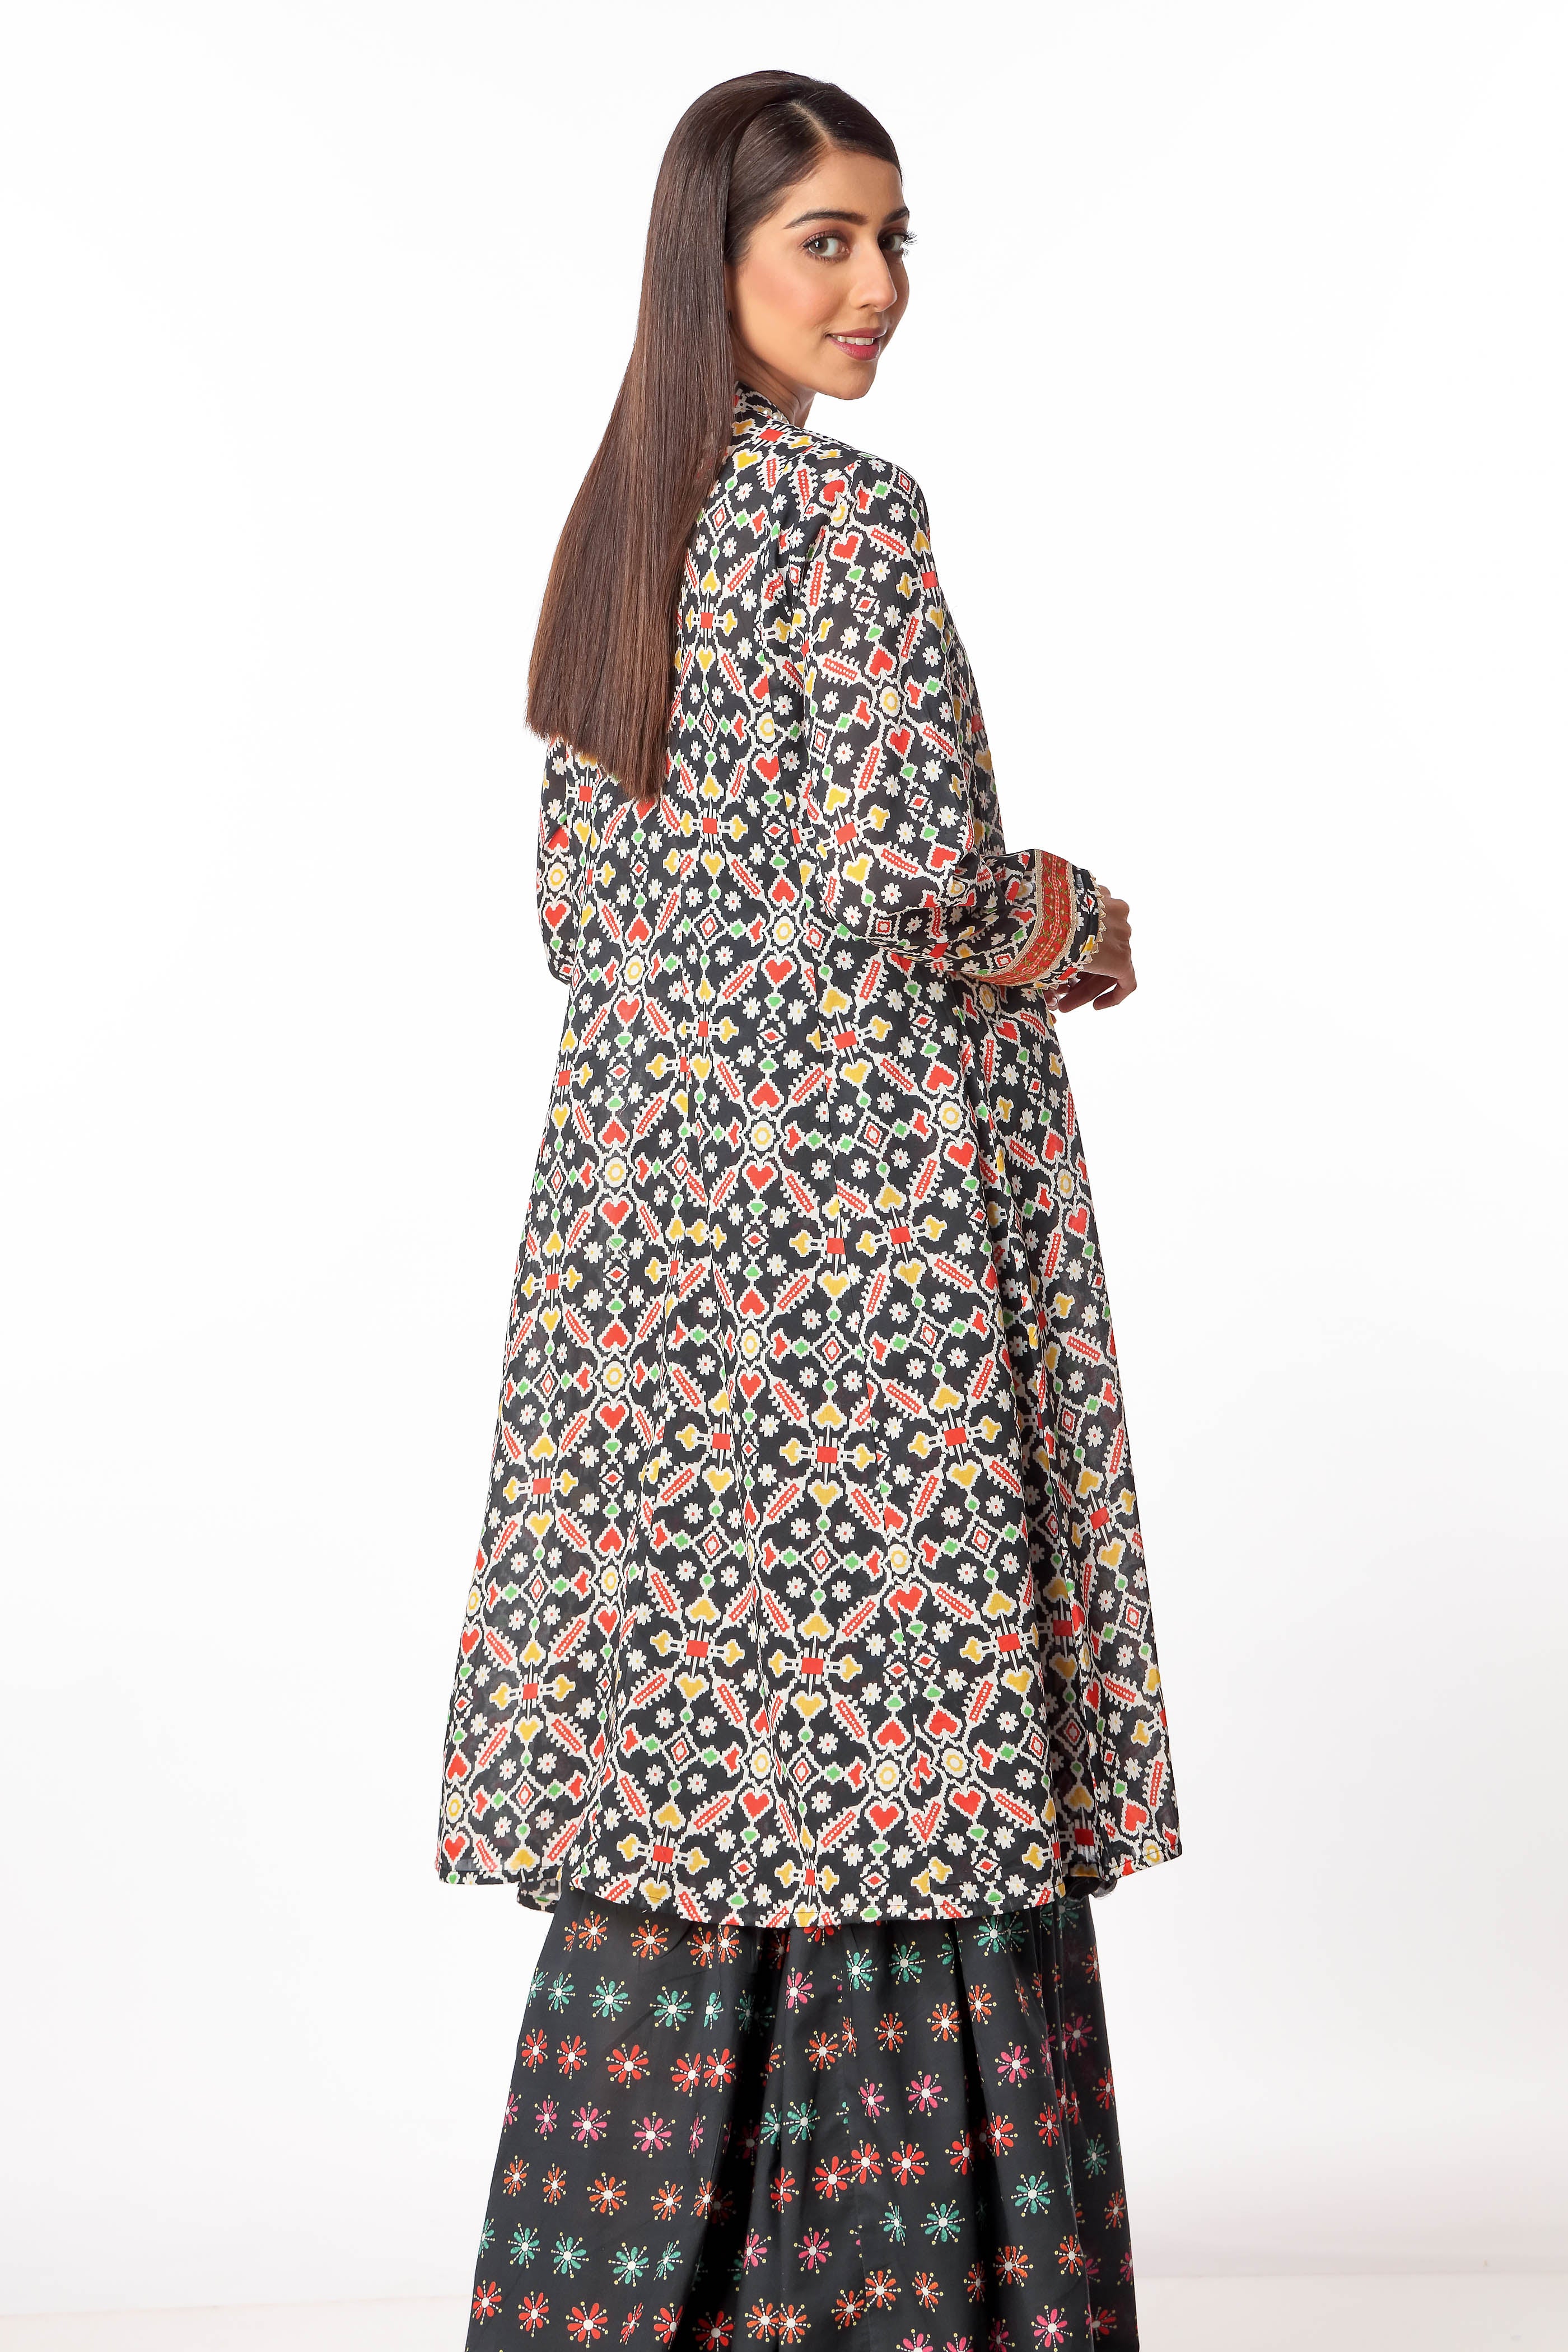 Patola Jaal in Multi coloured Printed Lawn fabric 3